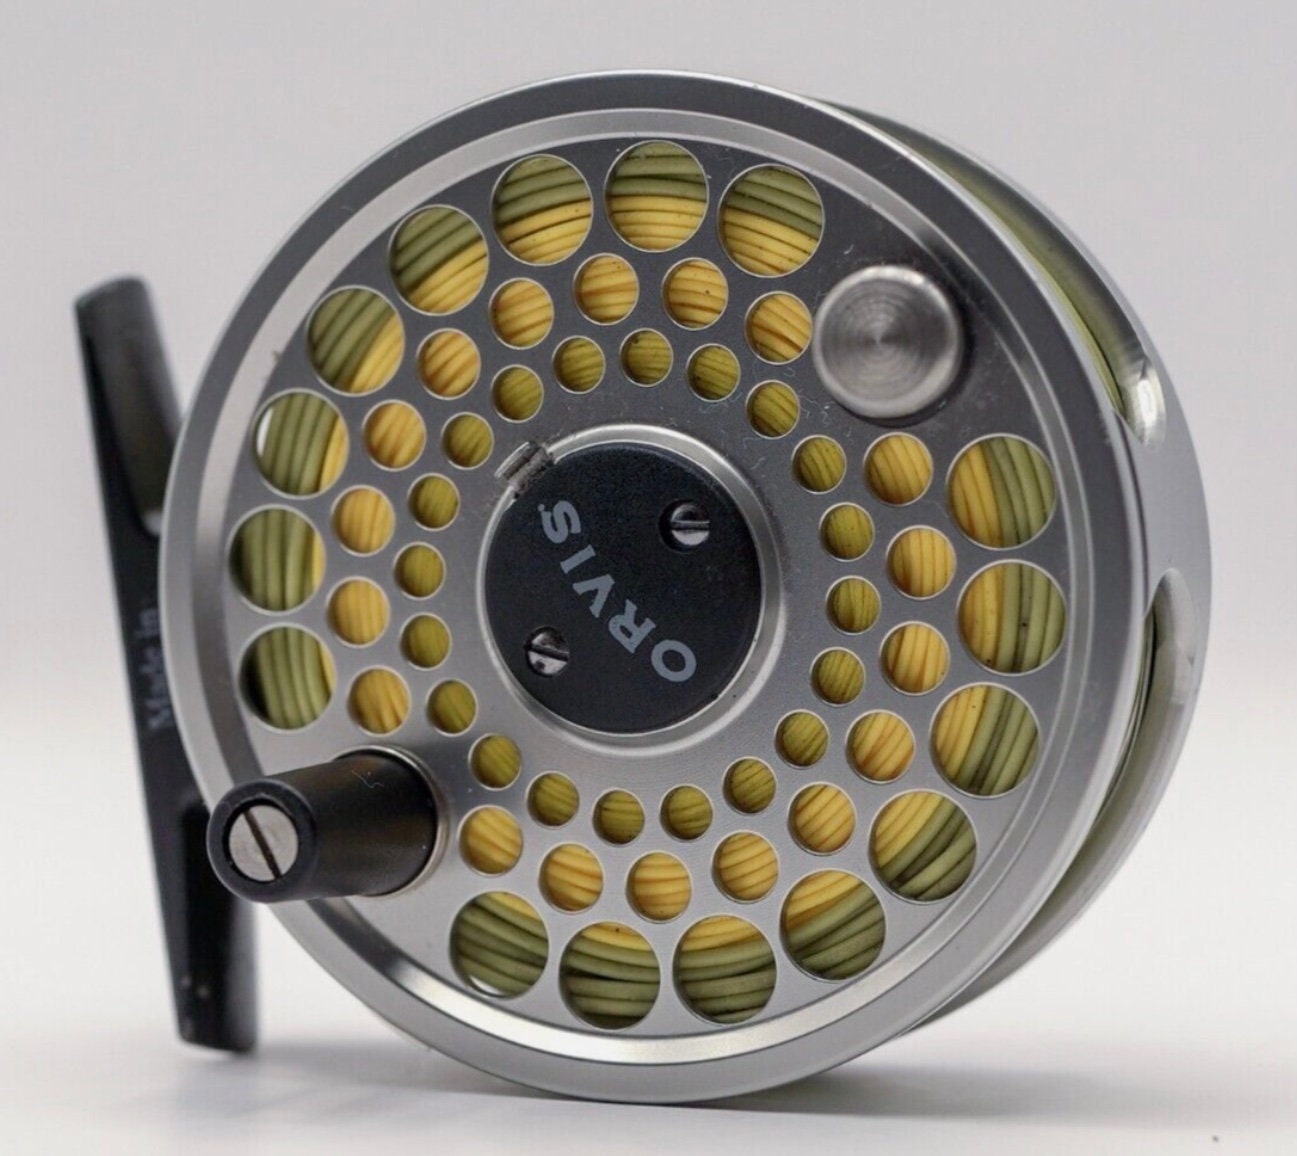 Orvis Battenkill Bbs Iii Fly Reel Cheap Collection